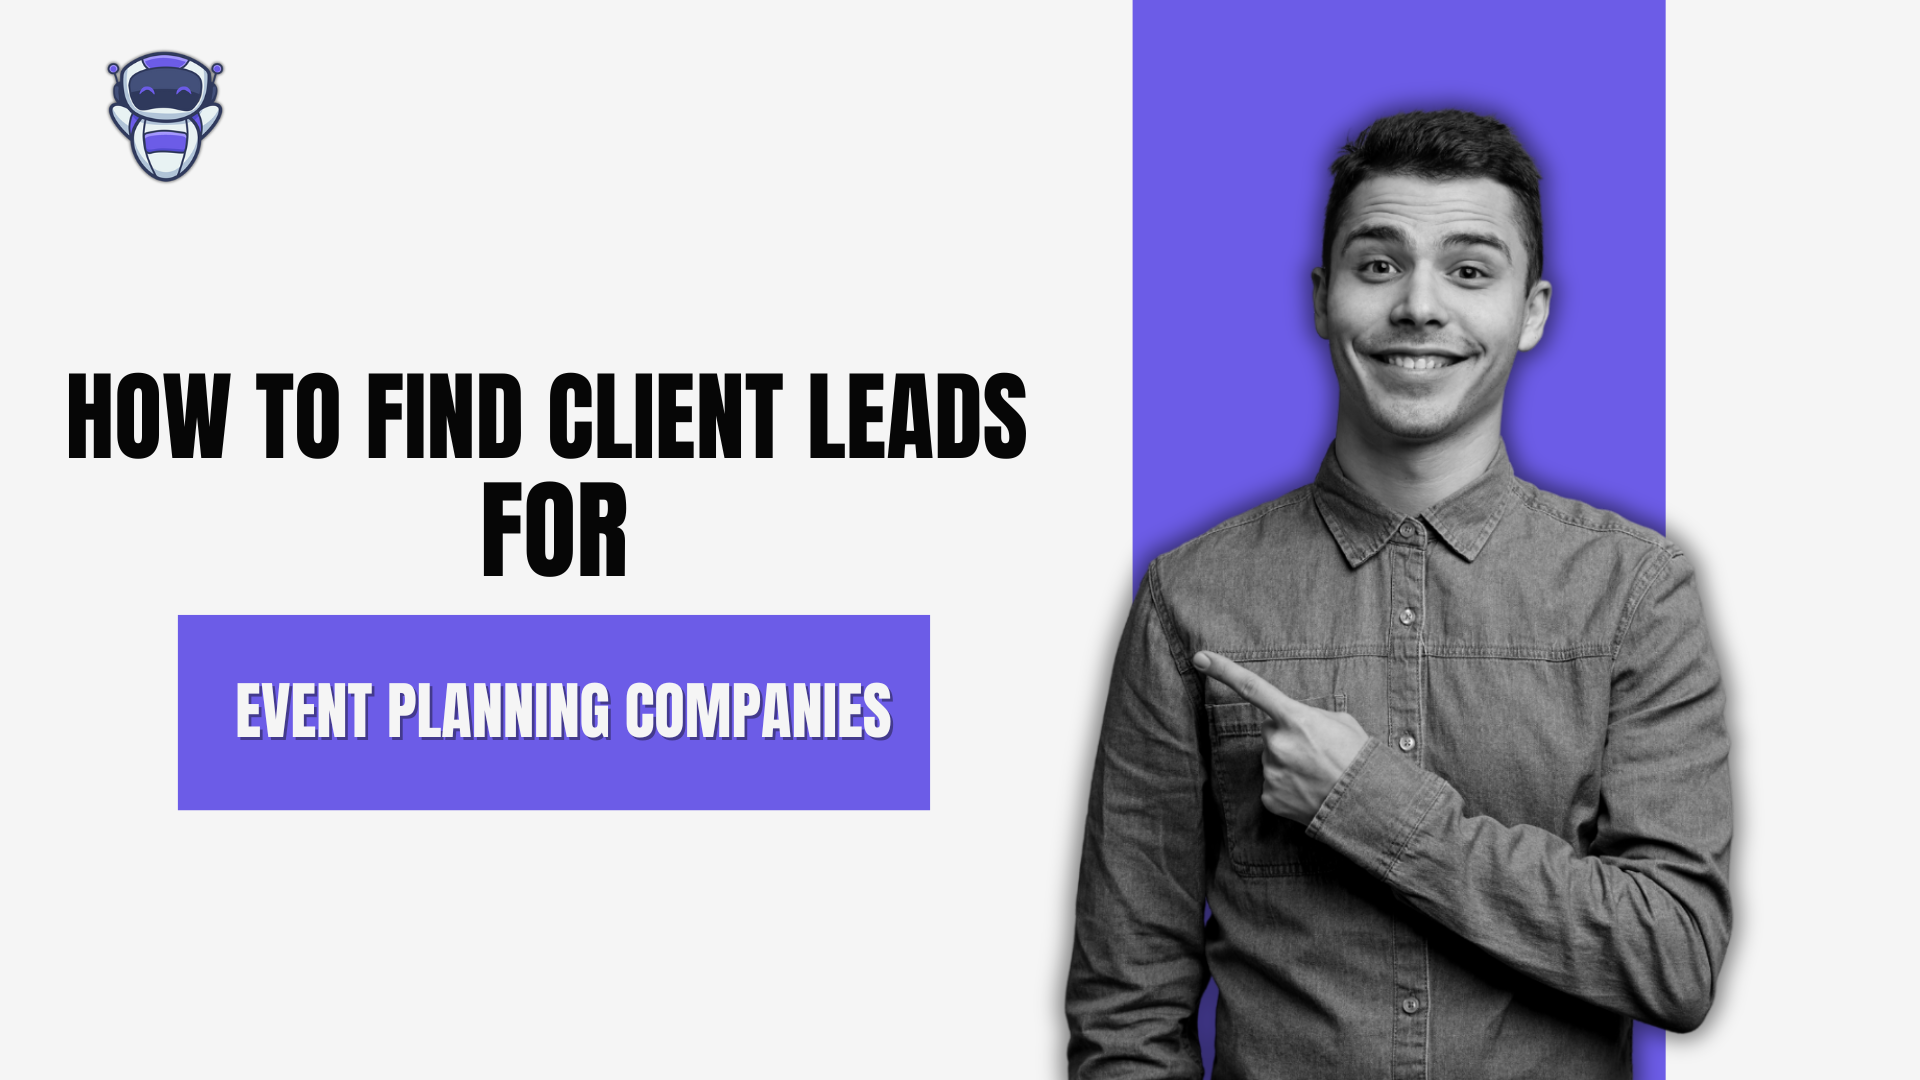 Leads For Event Planning Companies